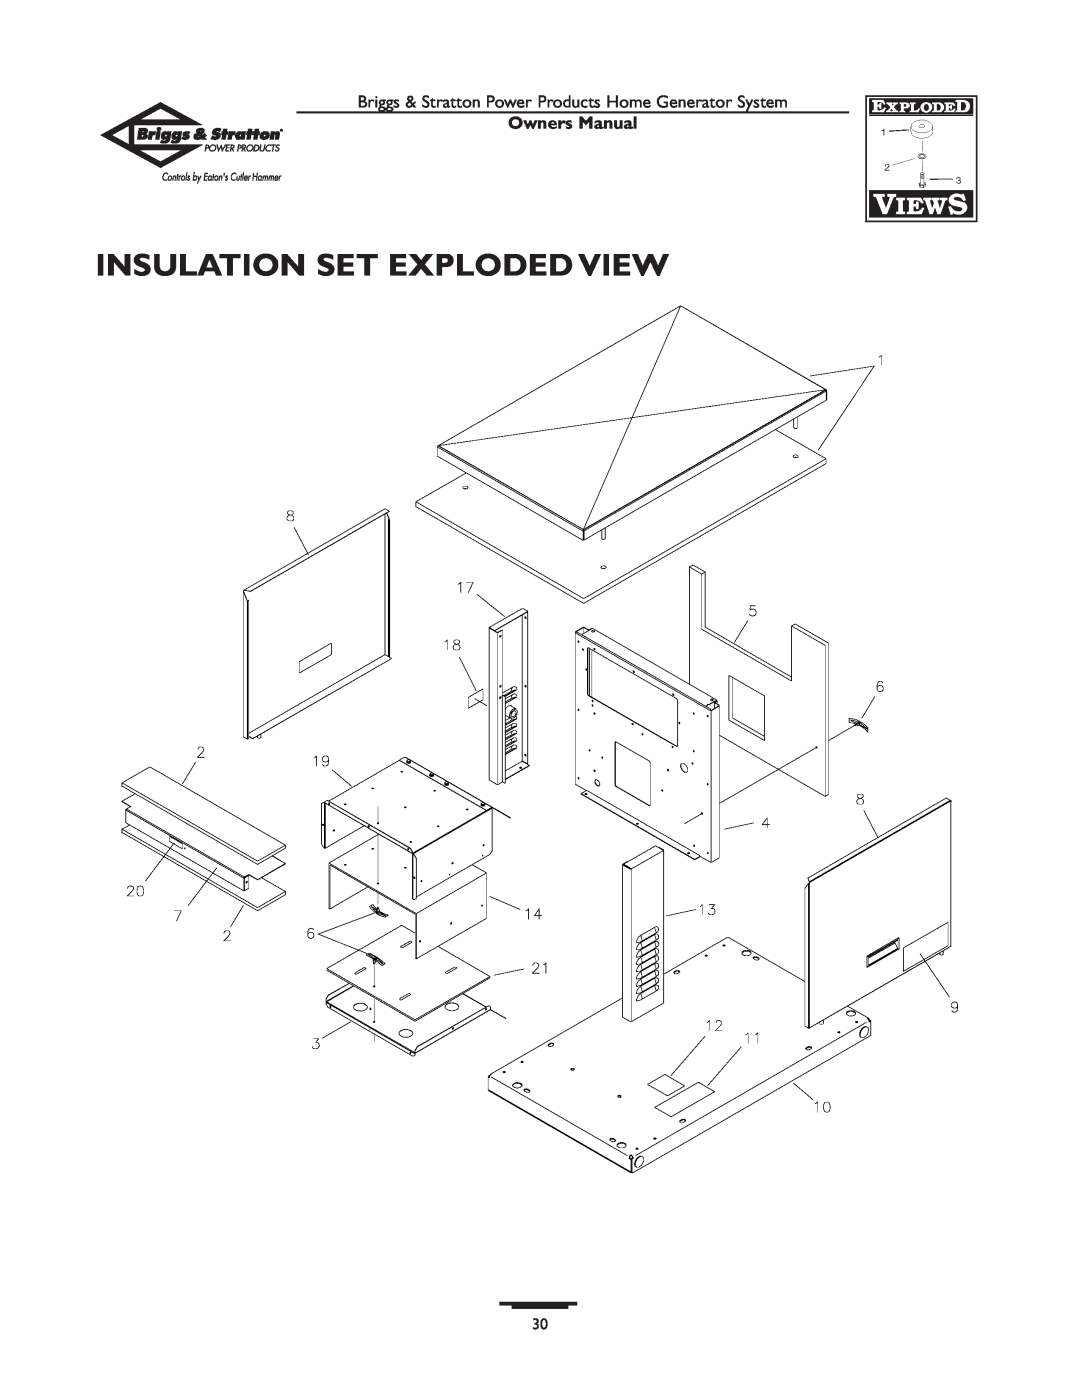 Briggs & Stratton 1679-0 owner manual Insulation Set Exploded View, Owners Manual 